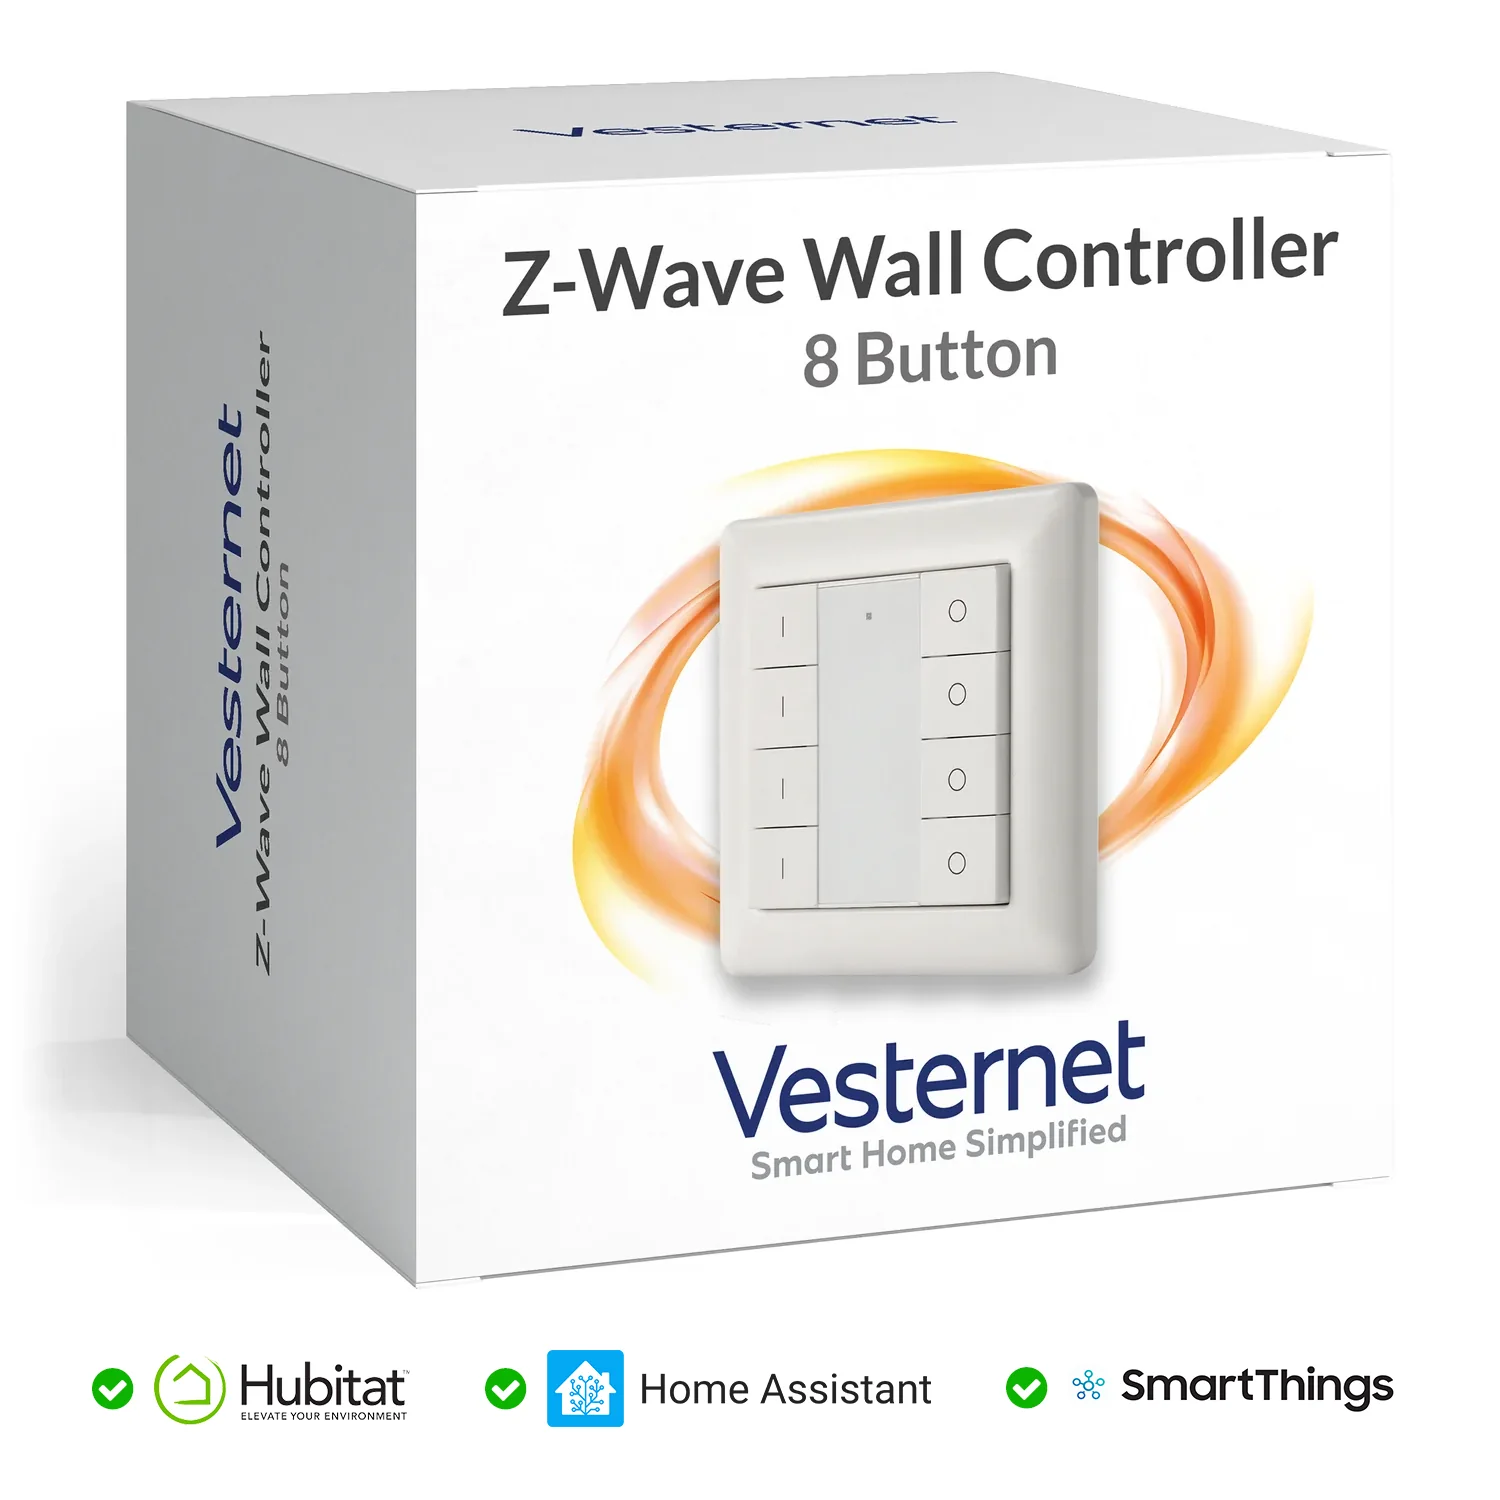 Vesternet Z-Wave Wall Controller - 8 Button Questions & Answers